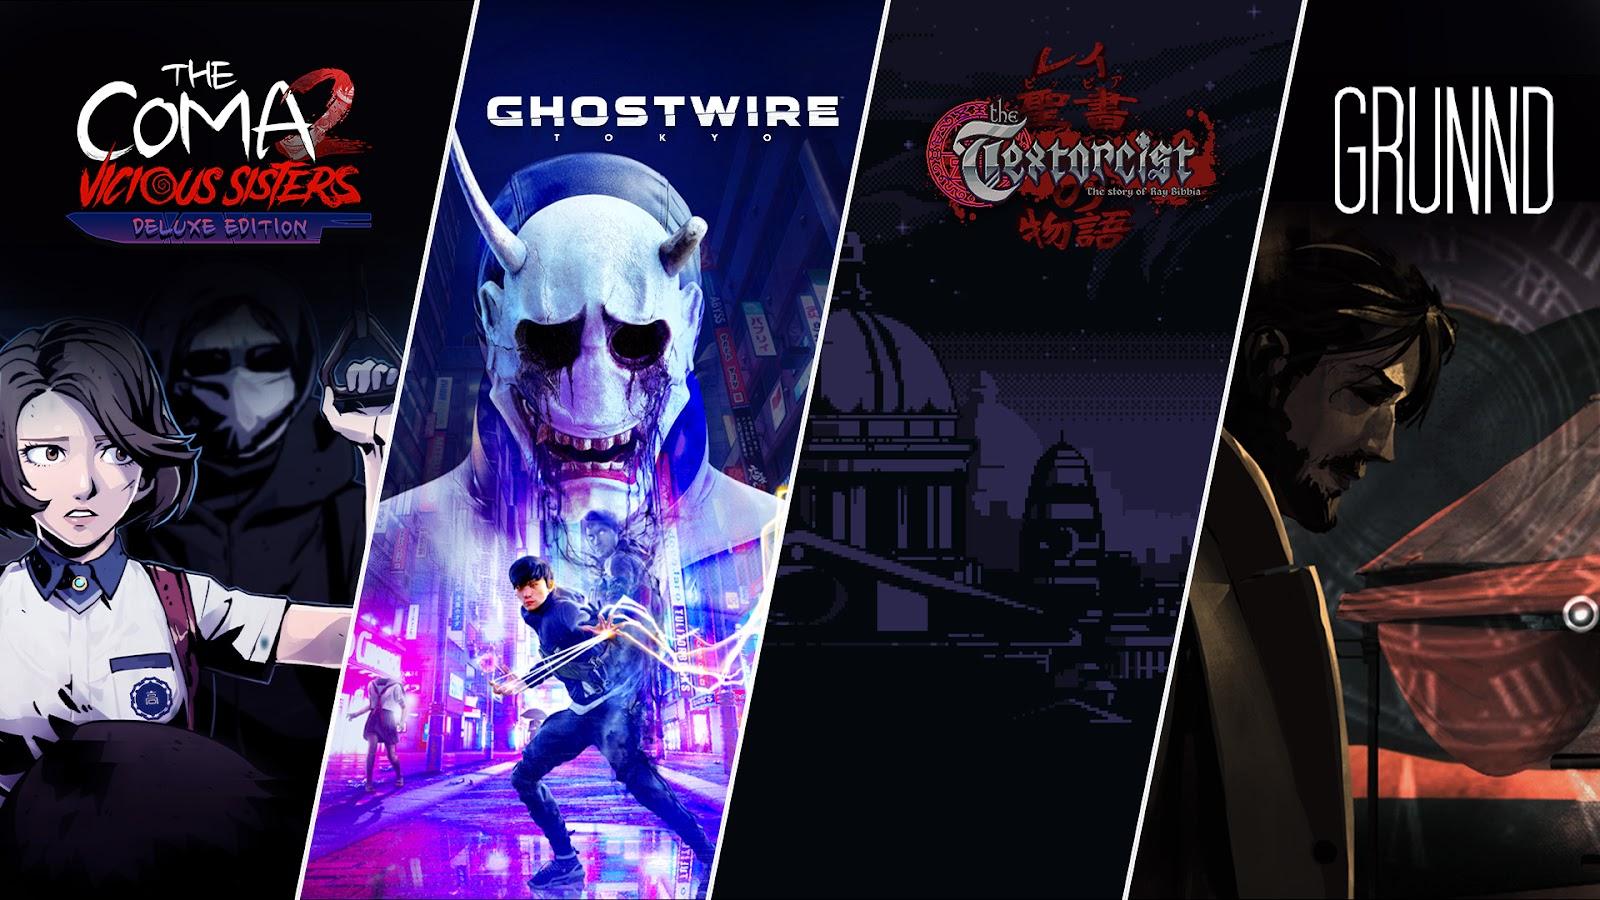 s Prime Gaming Free Games for October Revealed